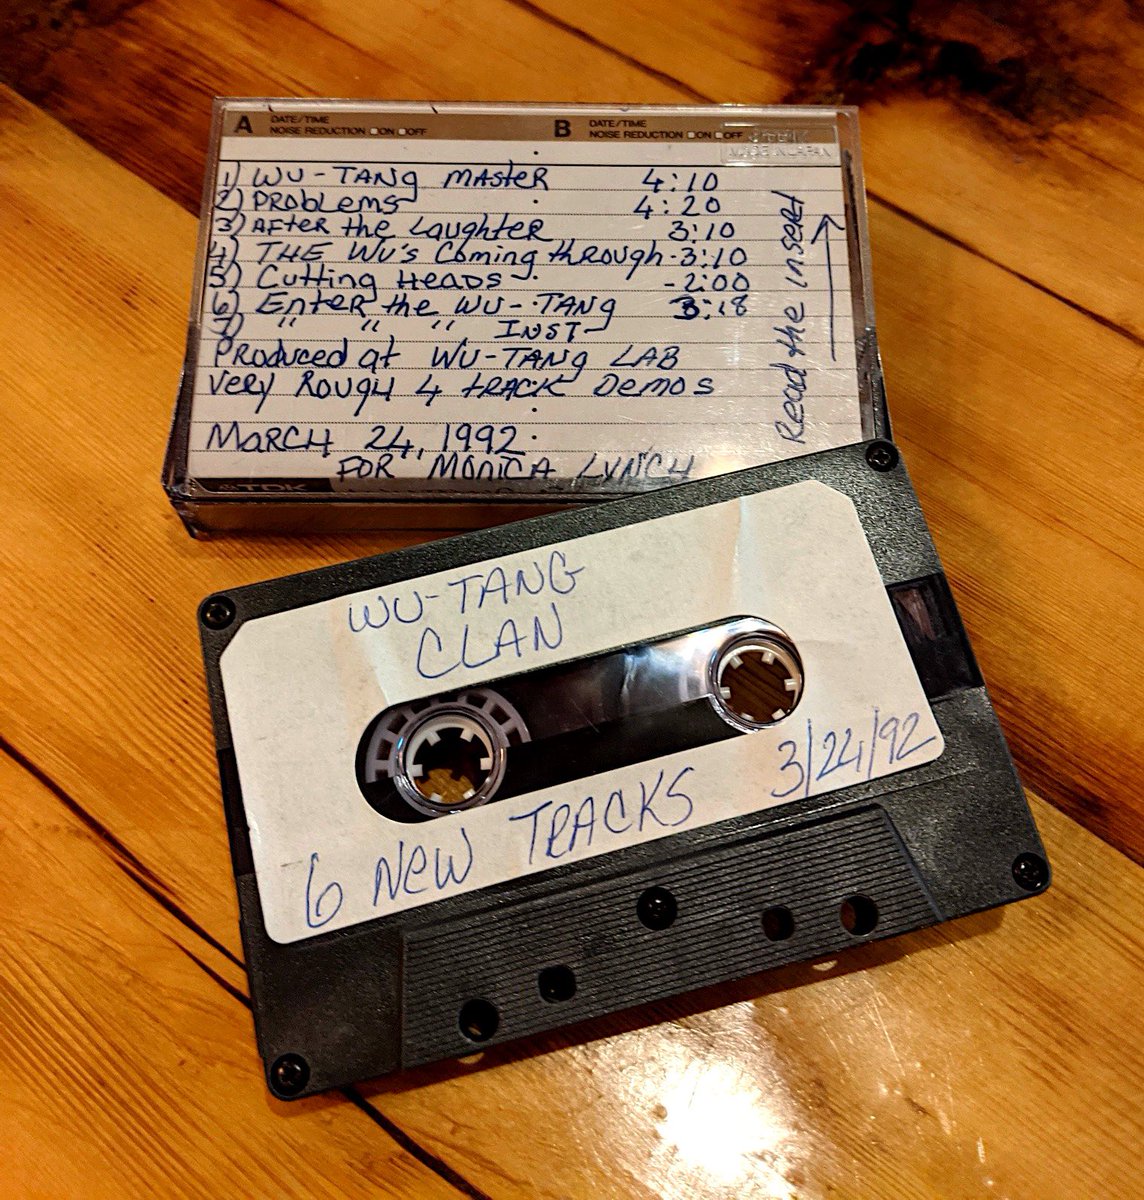 Wu-Tang Clan demo tape sent to Monica Lynch, president of Tommy Boy Records, March 24, 1992. #fbf